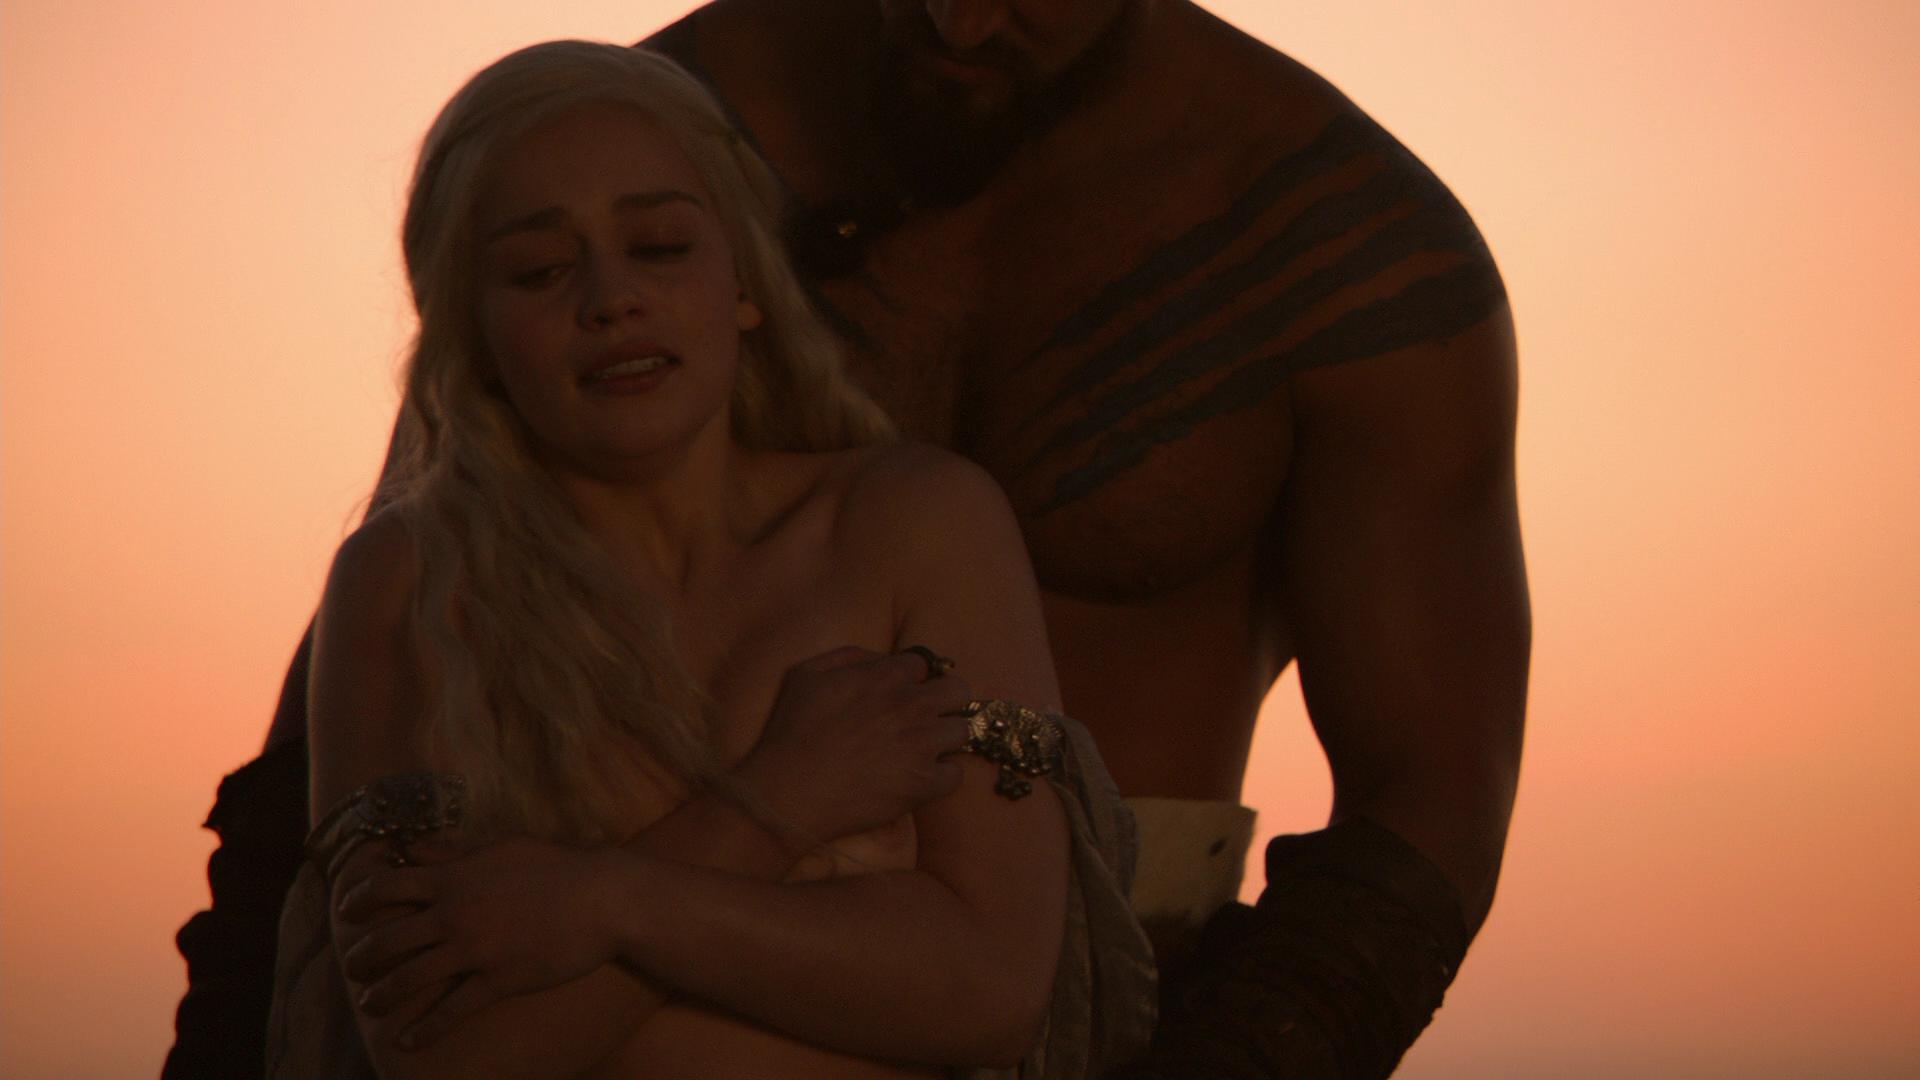 Game Of Thrones Nudity And Sex Collection Watch The Hottest Game